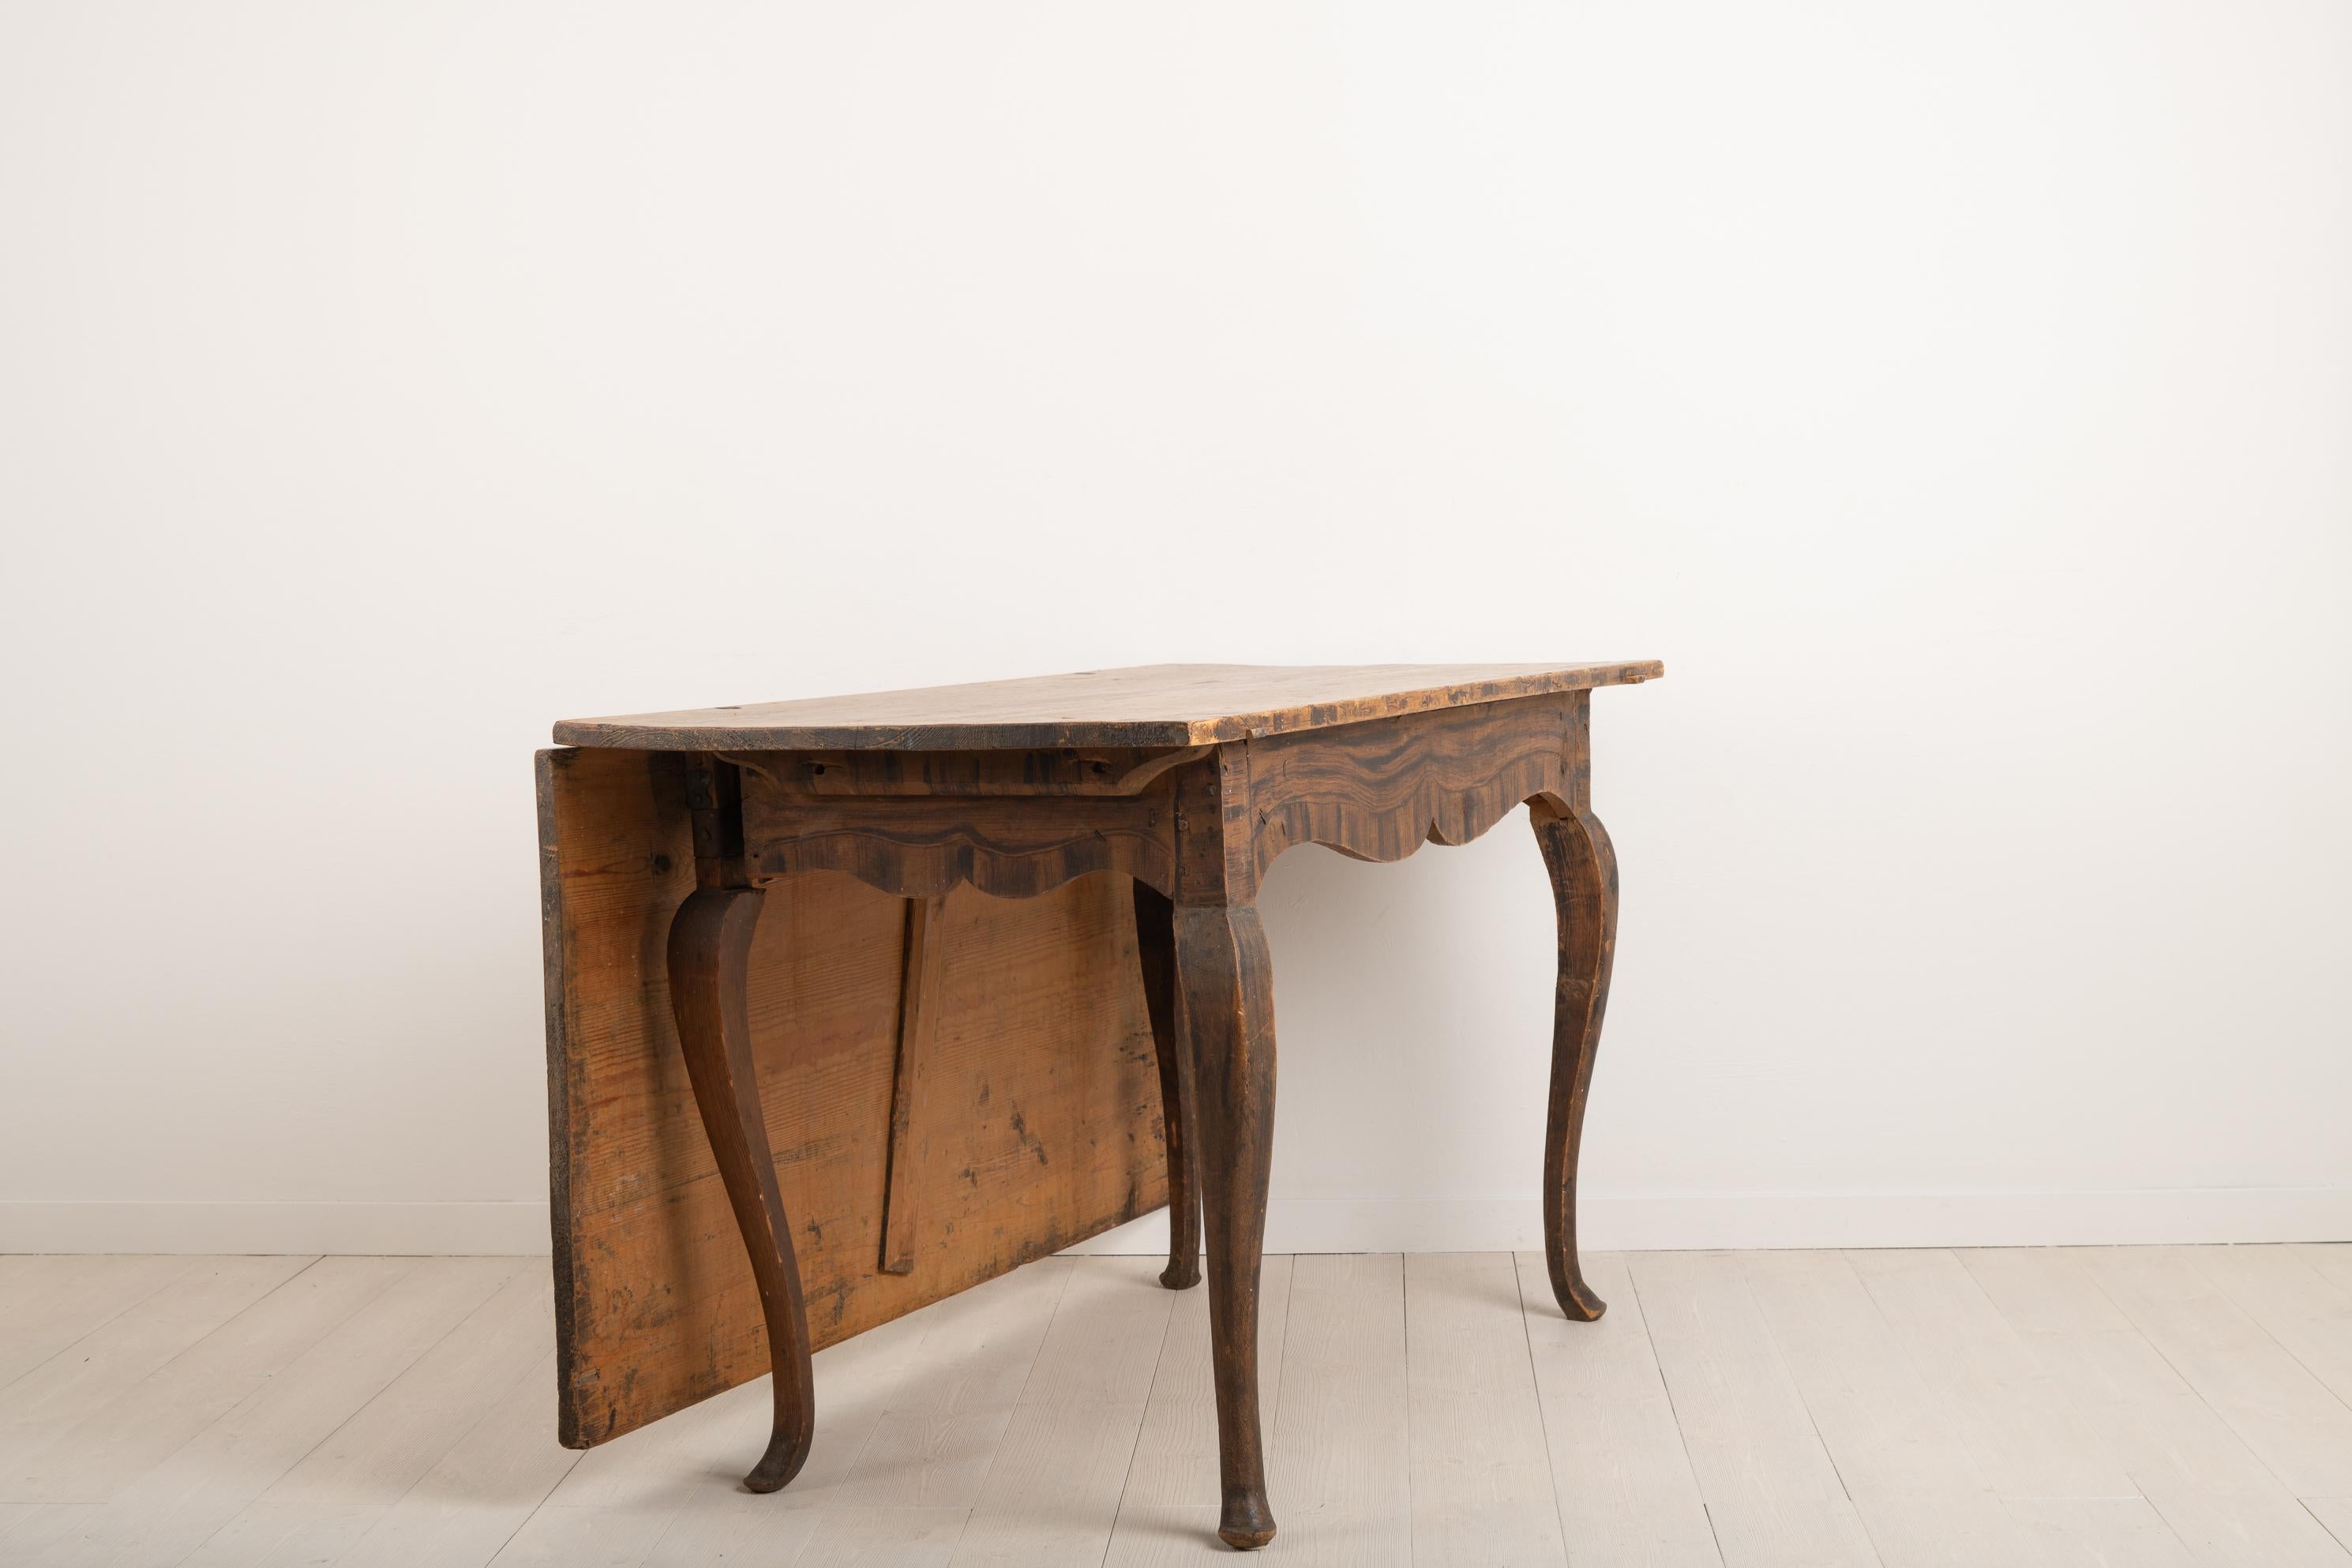 Pine Mid-18th Century Swedish Baroque Drop-Leaf Table For Sale